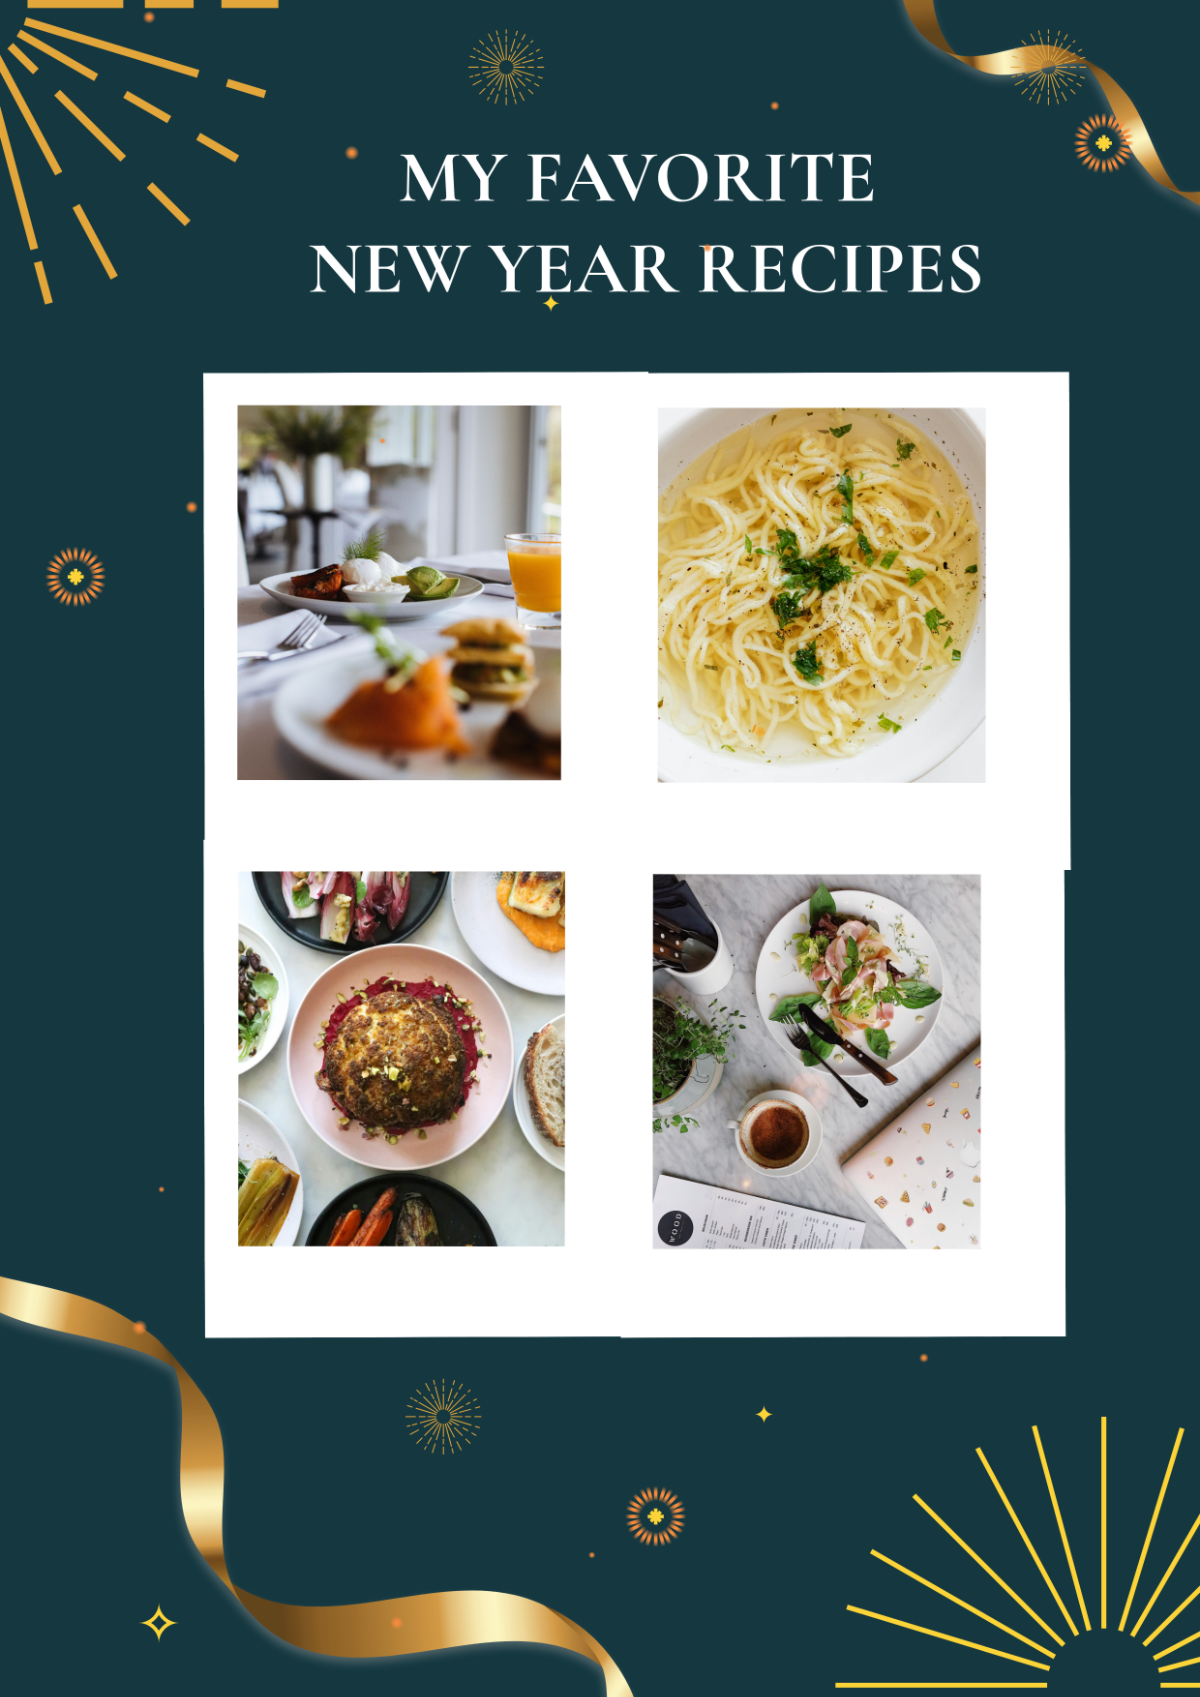 New Year Recipe Photo Collage